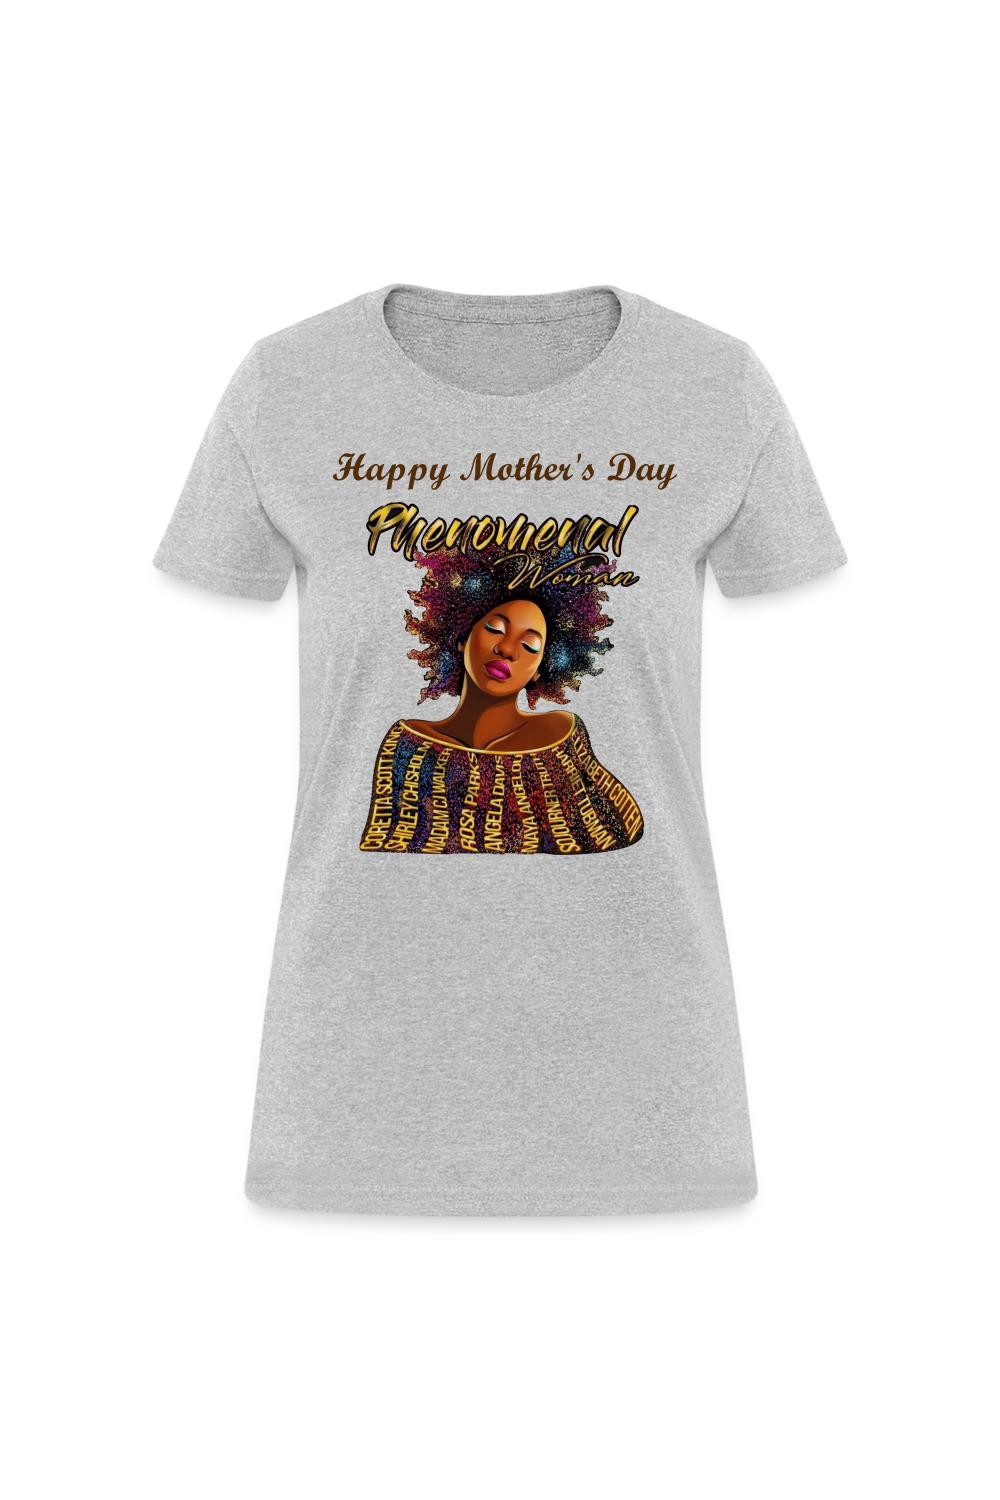 African American Women's Happy Mother's Day Woman Short Sleeve T-Shirt - heather gray